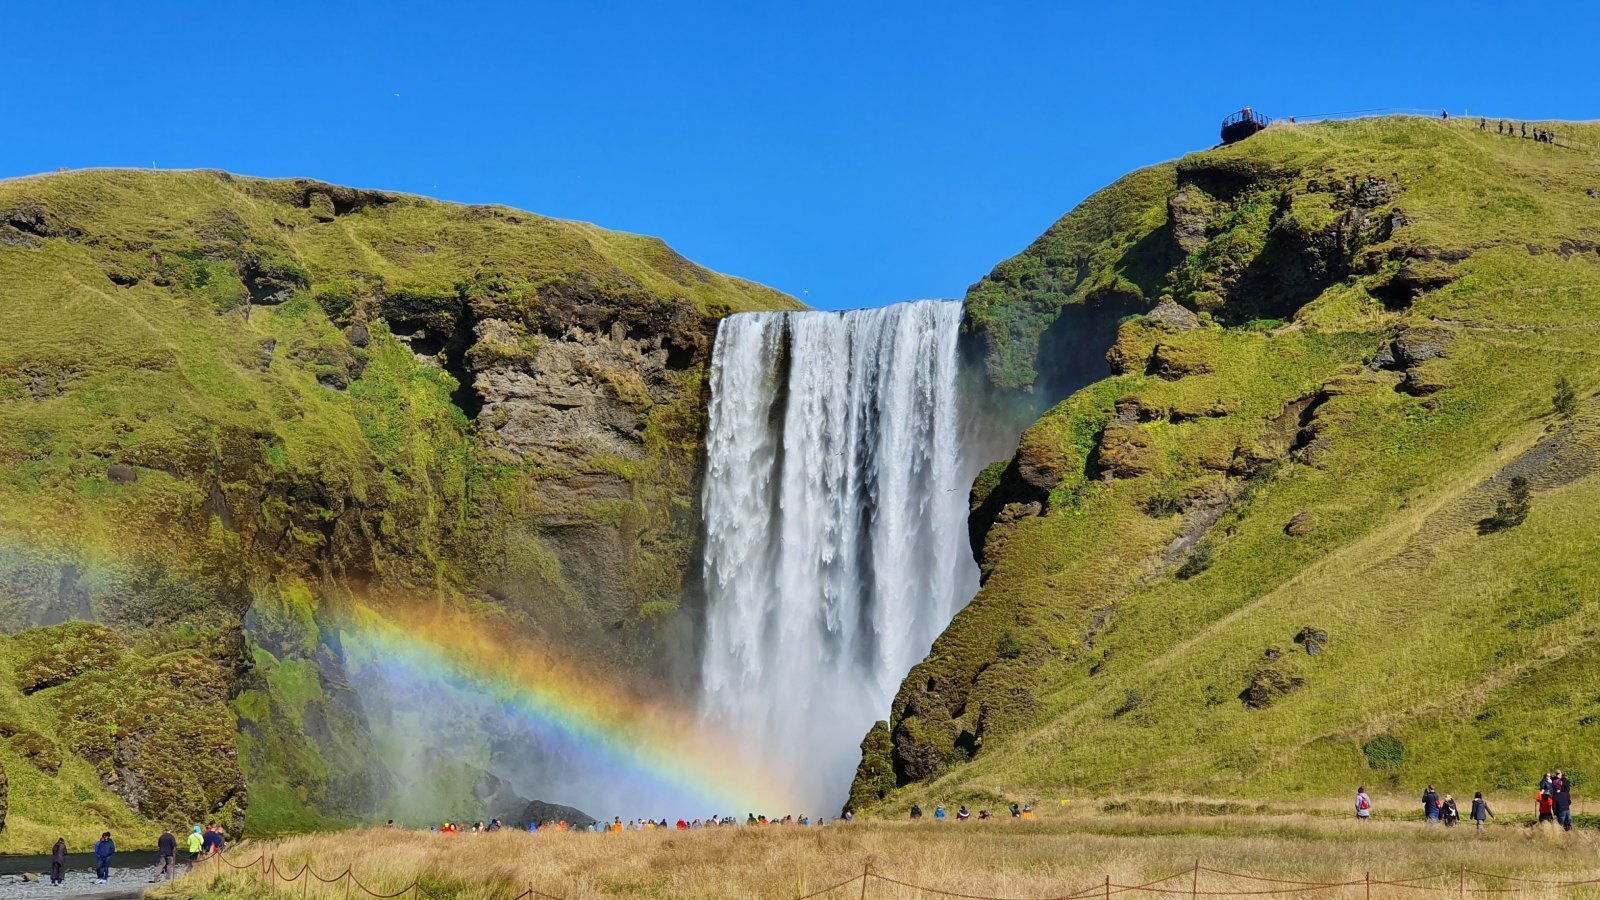 <p class="wp-caption-text">Image Credit: Shutterstock / Slyrritus</p>  <p><span>One of Iceland’s largest and most picturesque waterfalls, Skógafoss has water plummeting 60 meters over a wide cliff, creating a thunderous roar and often a rainbow in its mist. Located on the Skógá River along the country’s southern coast, the waterfall is easily accessible and offers stunning views both from its base and from a vantage point at the top of a steep staircase.</span></p>